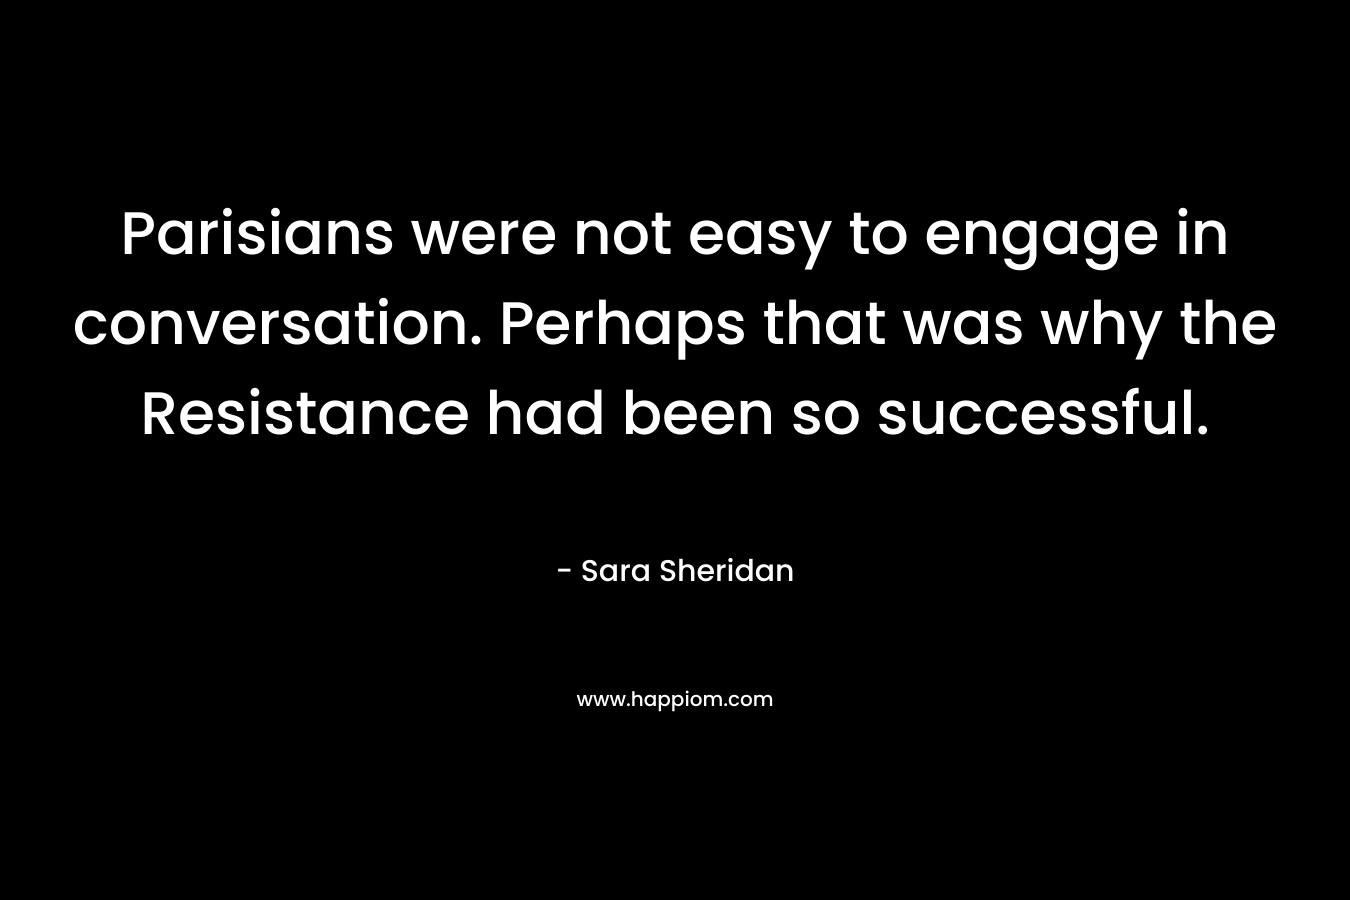 Parisians were not easy to engage in conversation. Perhaps that was why the Resistance had been so successful. – Sara Sheridan